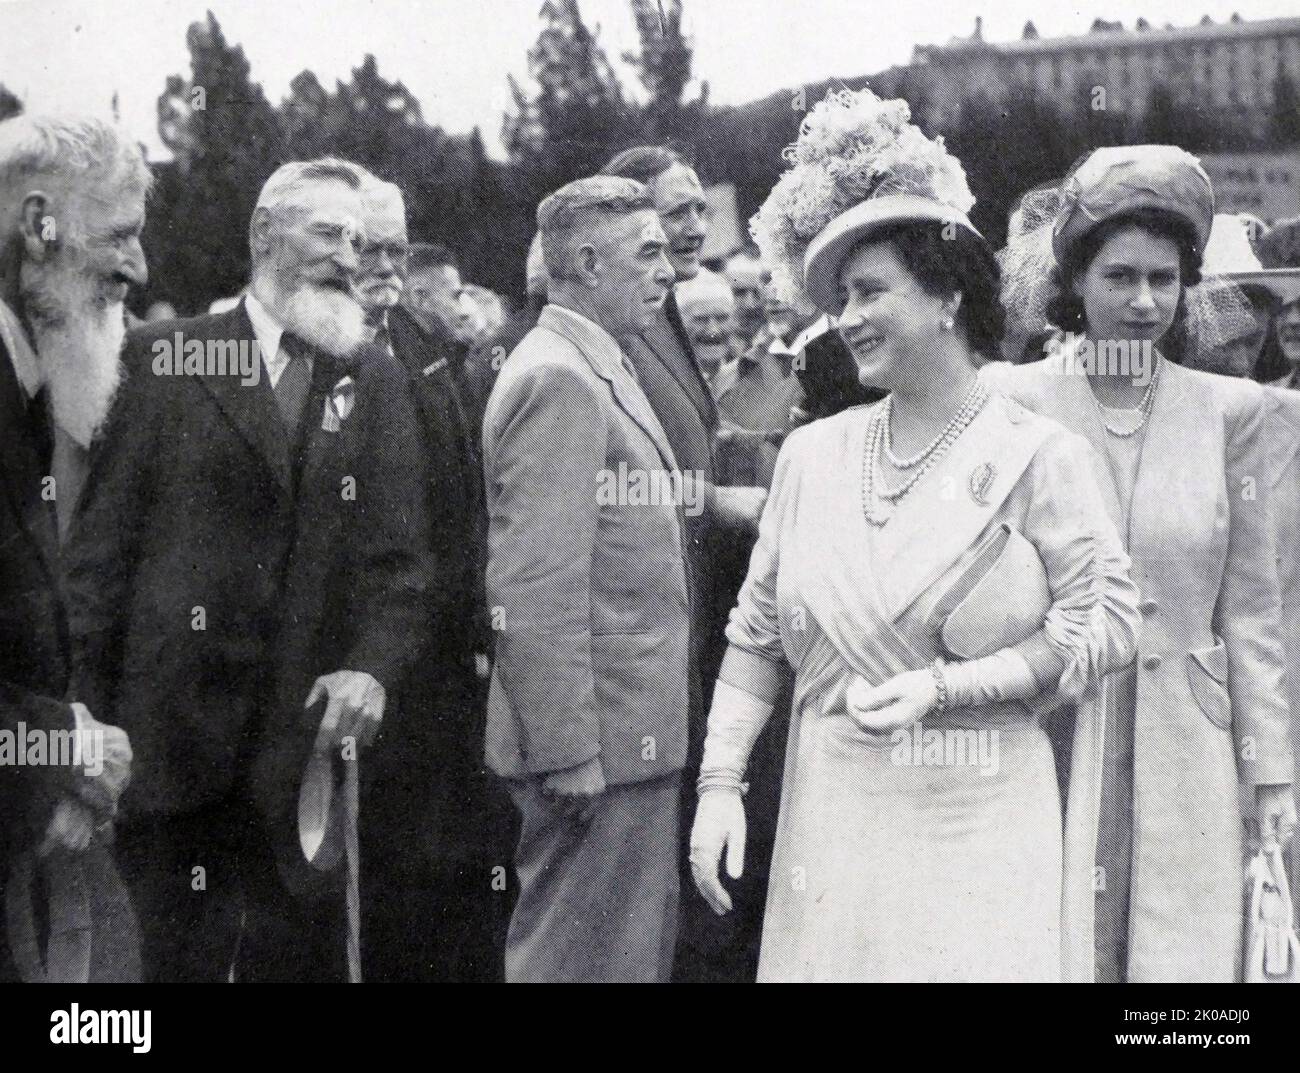 Queen Elizabeth of England with Princess Elizabeth in South Africa, 1947 meeting outstryders, veterans who fought for the Boer Republics, during the Anglo-Boer War of 1899-1902 Stock Photo